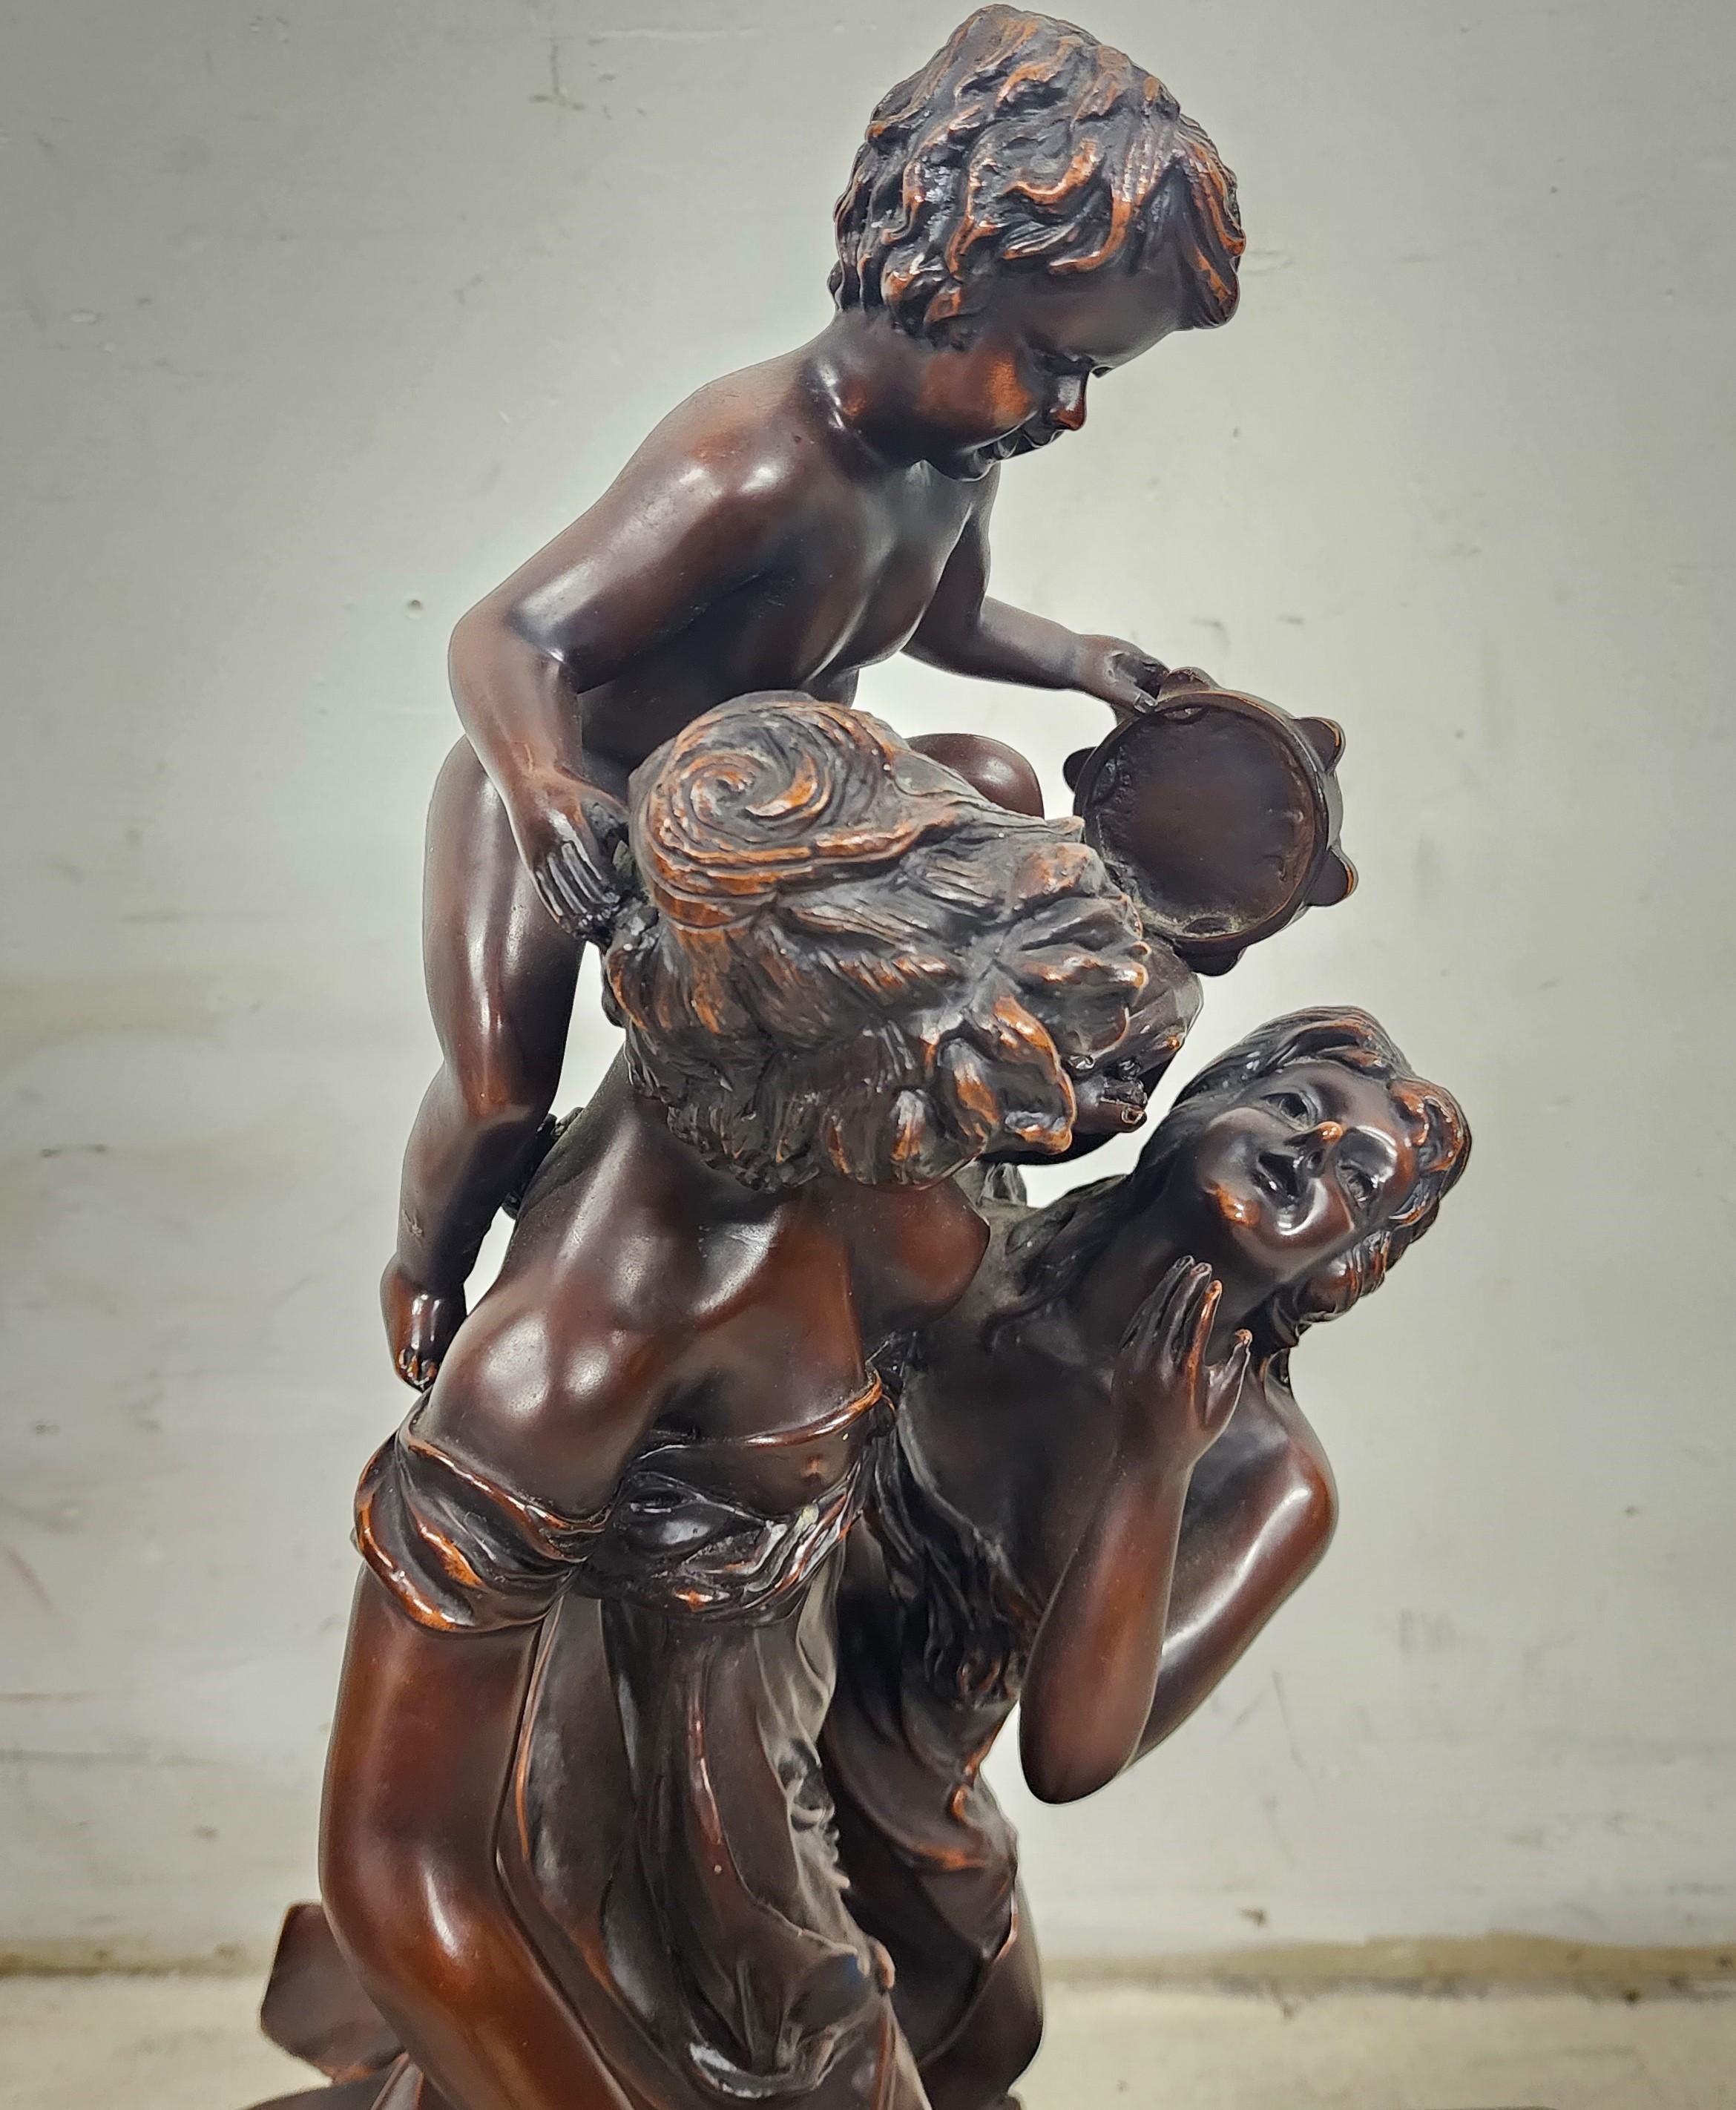 For FULL item description click on CONTINUE READING at the bottom of this page.

Offering One Of Our Recent Palm Beach Estate Fine Furniture Acquisitions Of A
A Massive Signed Neoclassical 19th Century Bronze Sculpture Depicting a Whimsical Scene of